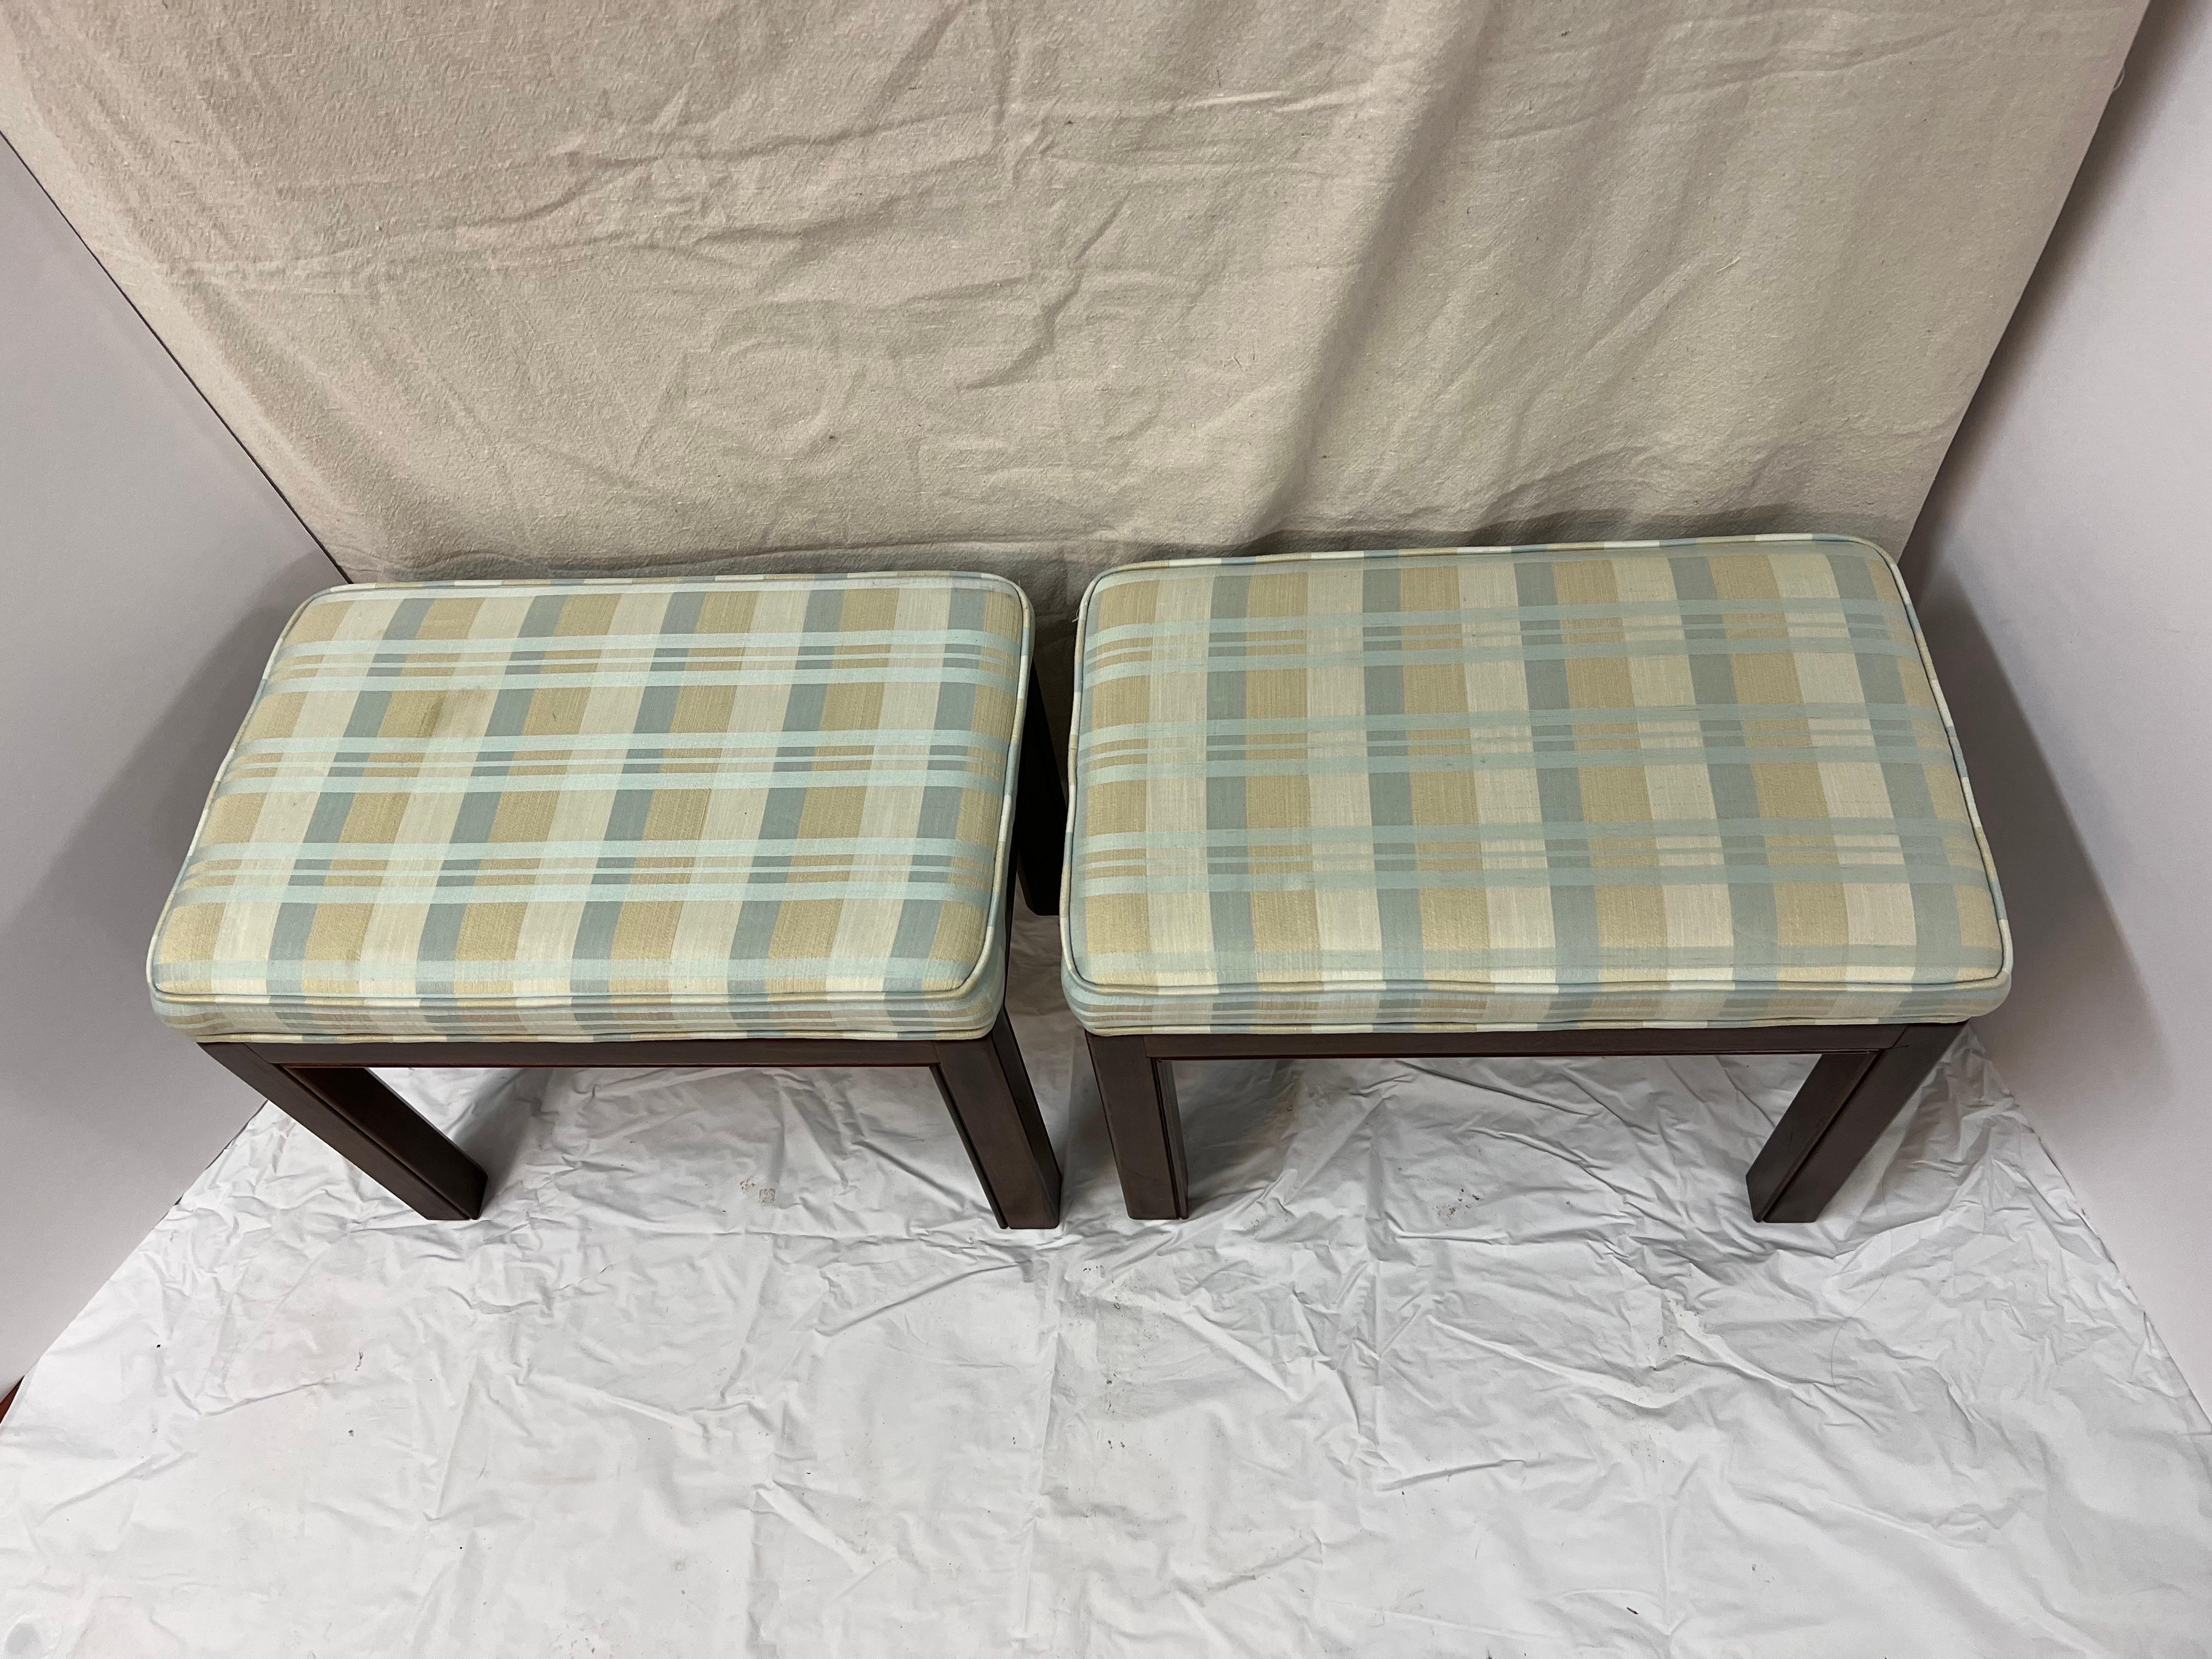 Classic pair of Drexel Heritage Ottomans or Foot Stools. Perfect for under a console or at the end of a bed. Signed and in very good condition. These can parcel ship economically over white glove. Please request a Parcel Quote.